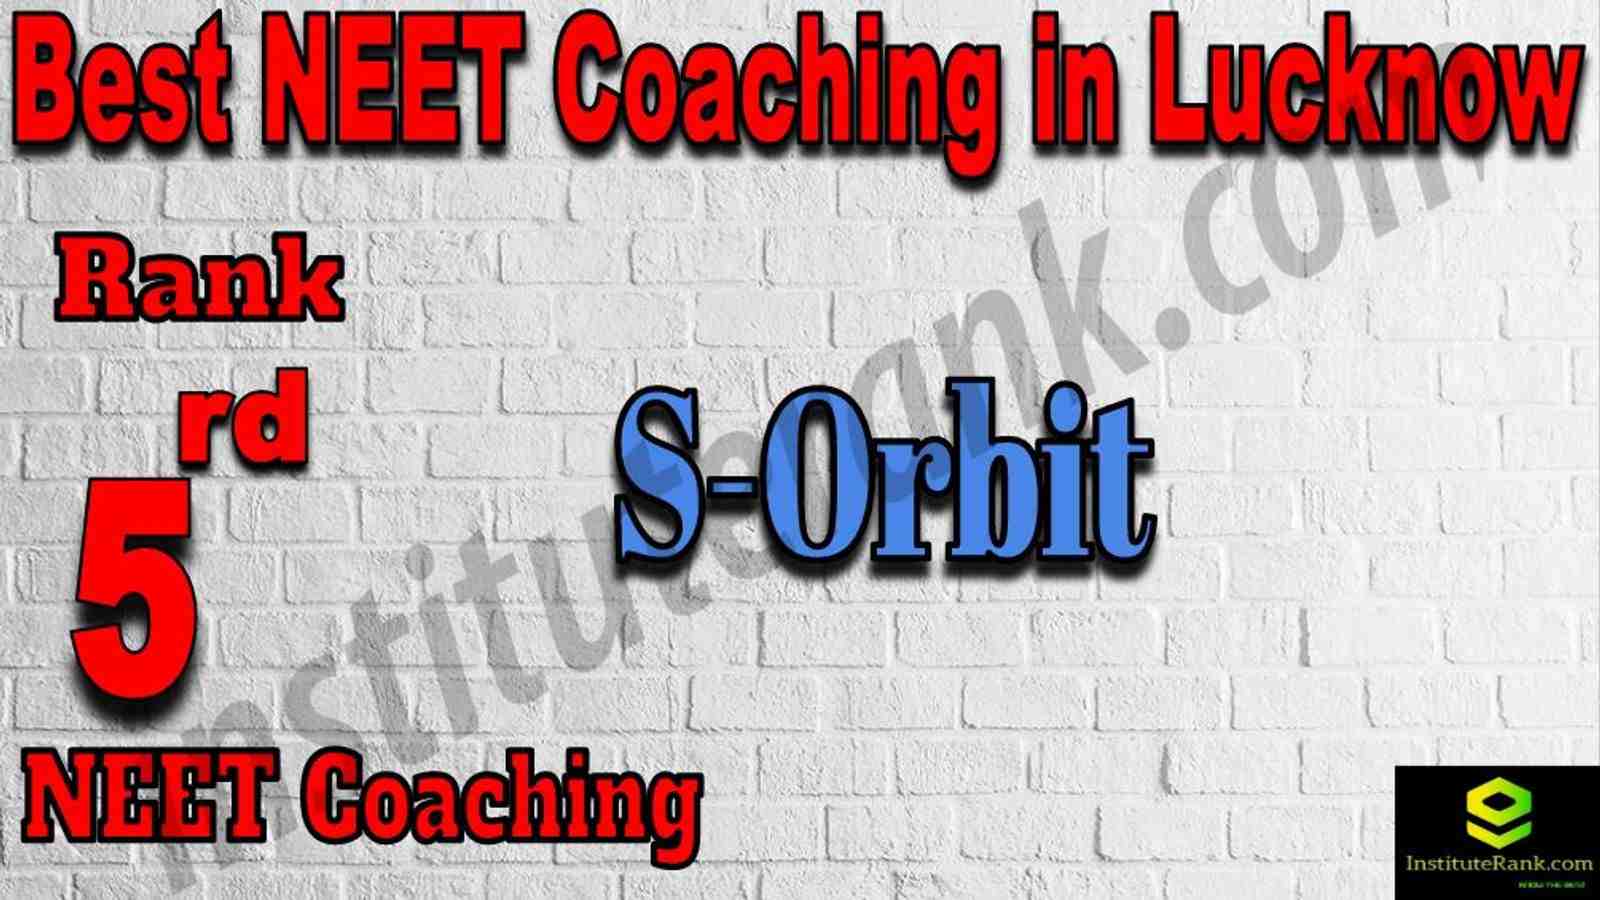 5th Best Neet Coaching in Lucknow